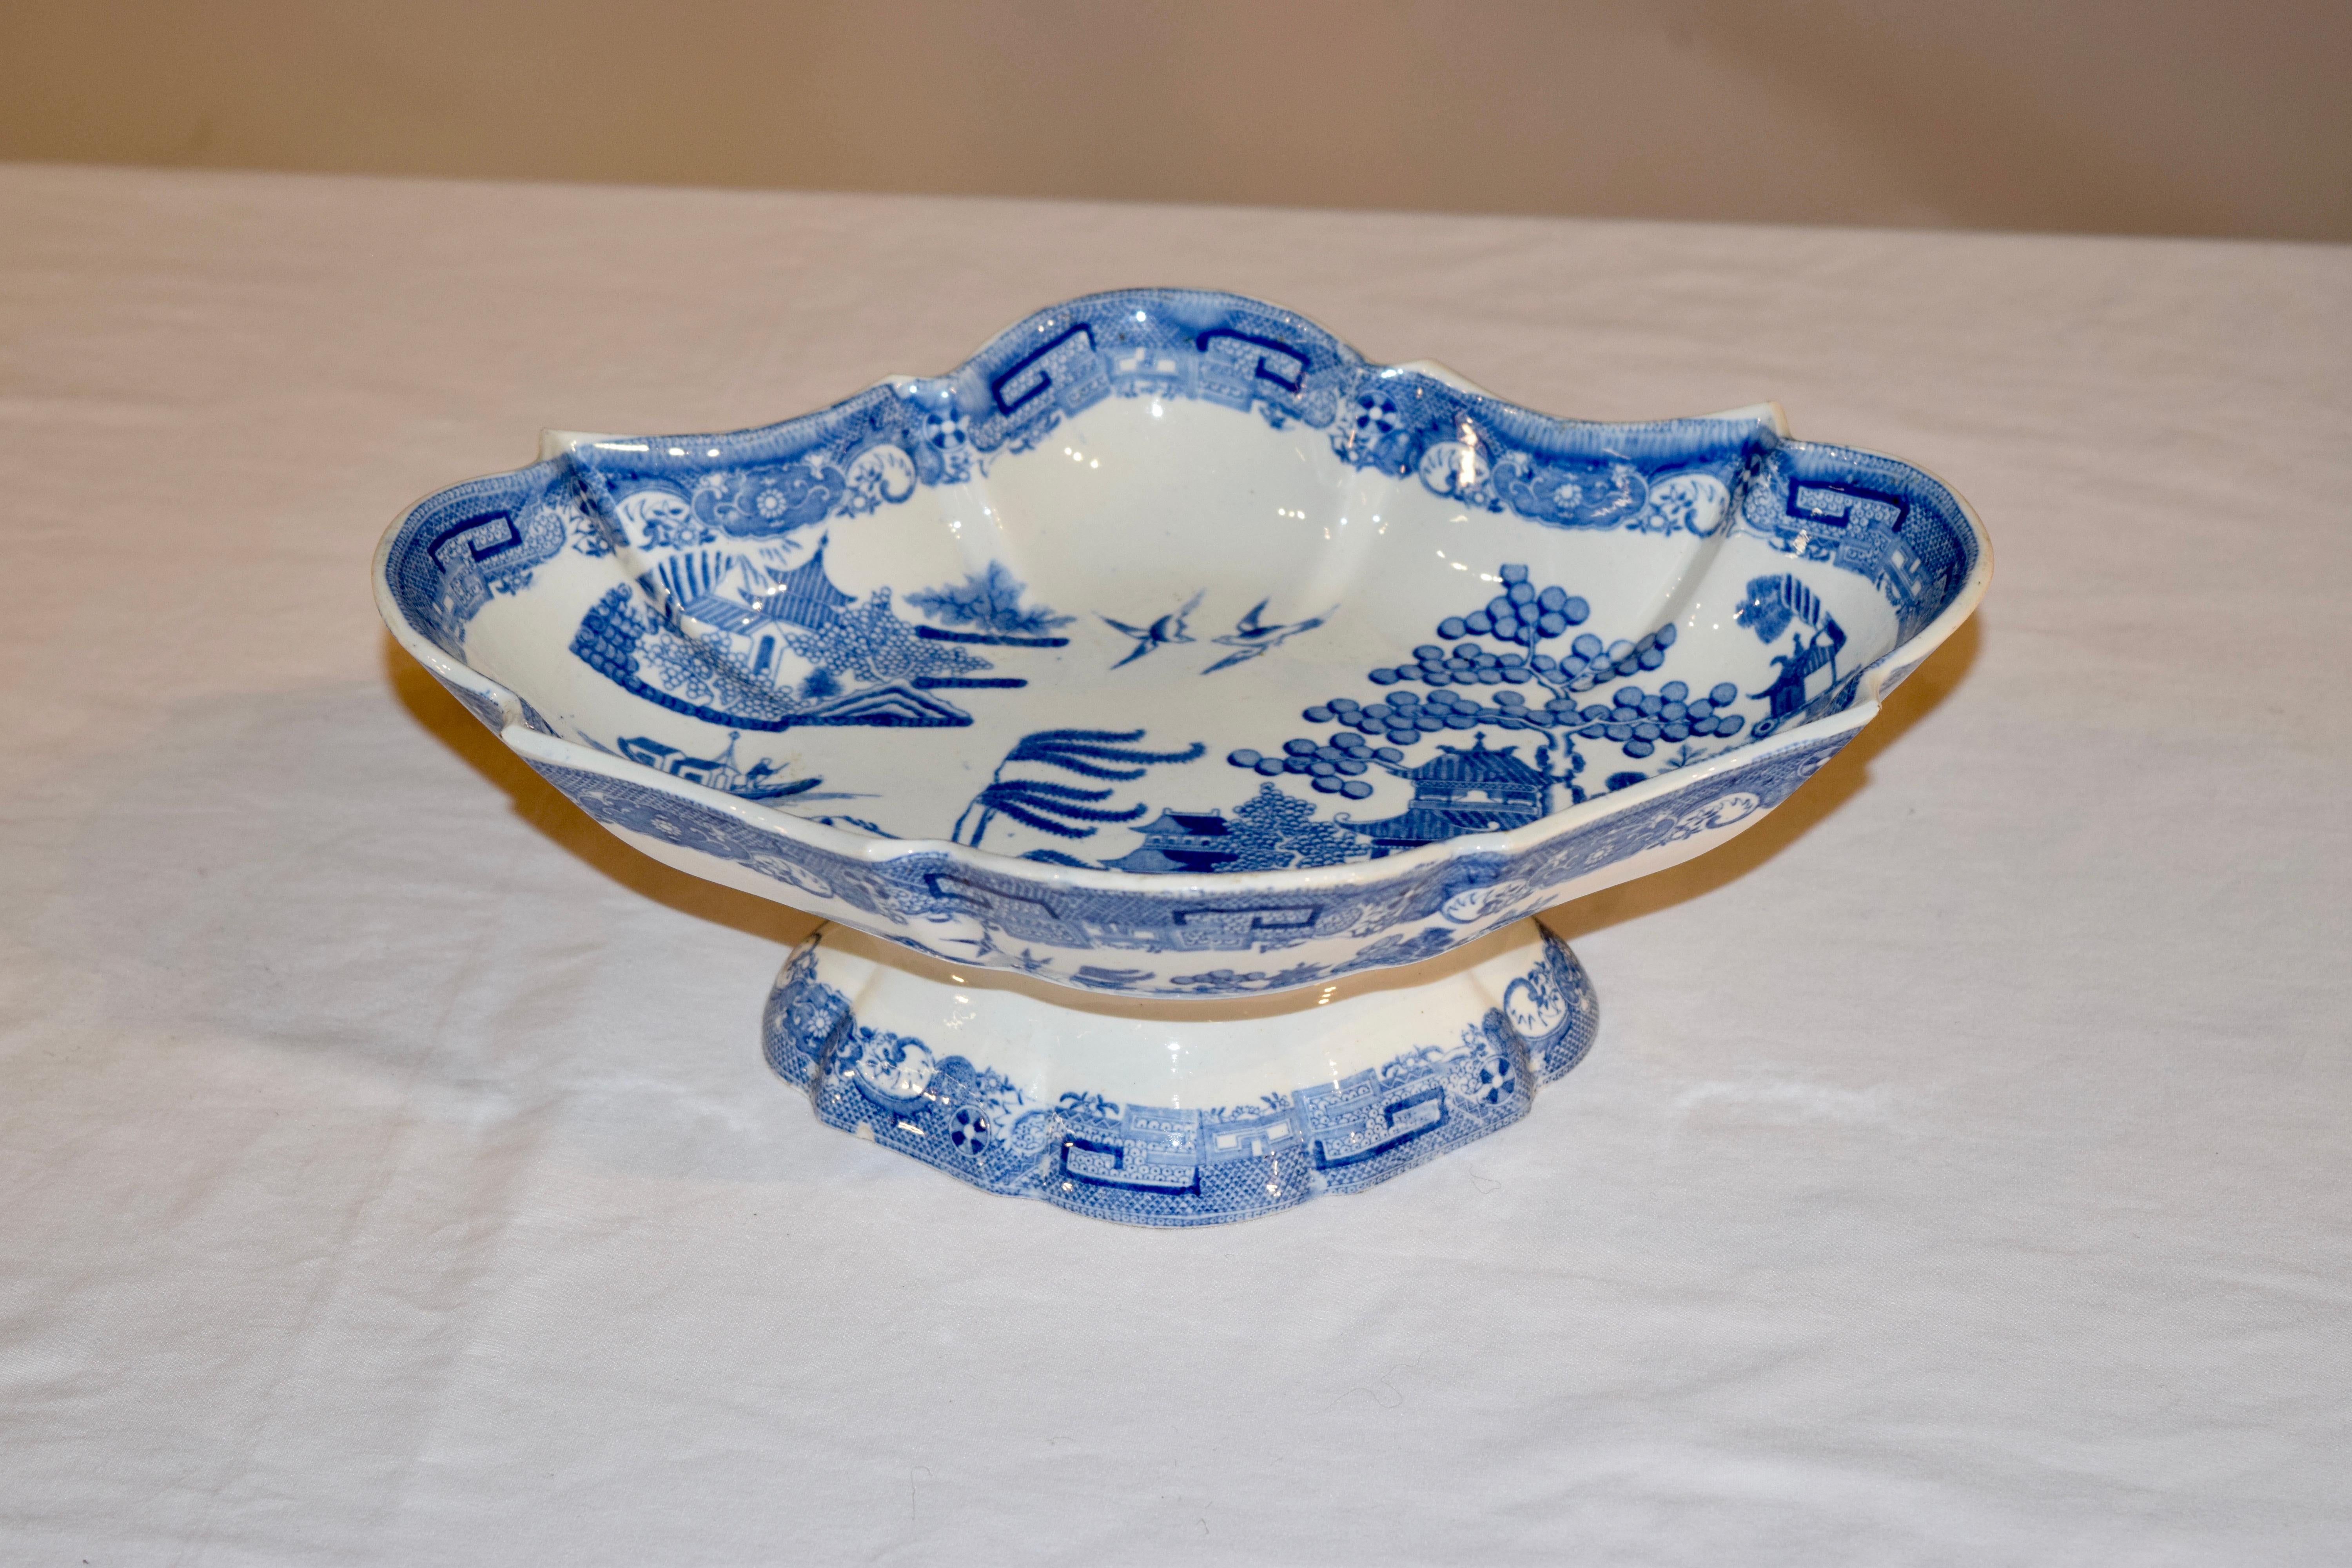 19th Century English Porcelain Footed Bowl 2